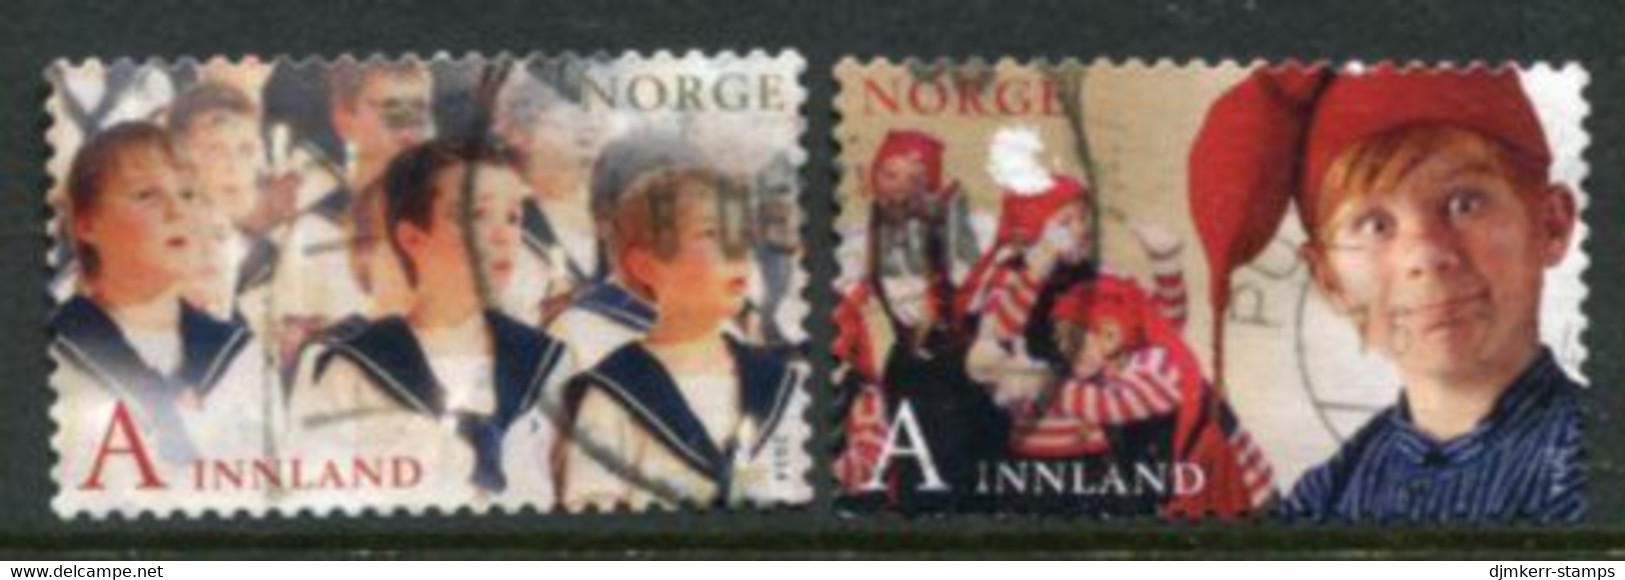 NORWAY 2014 Christmas  Used.  Michel 1866-67 - Used Stamps